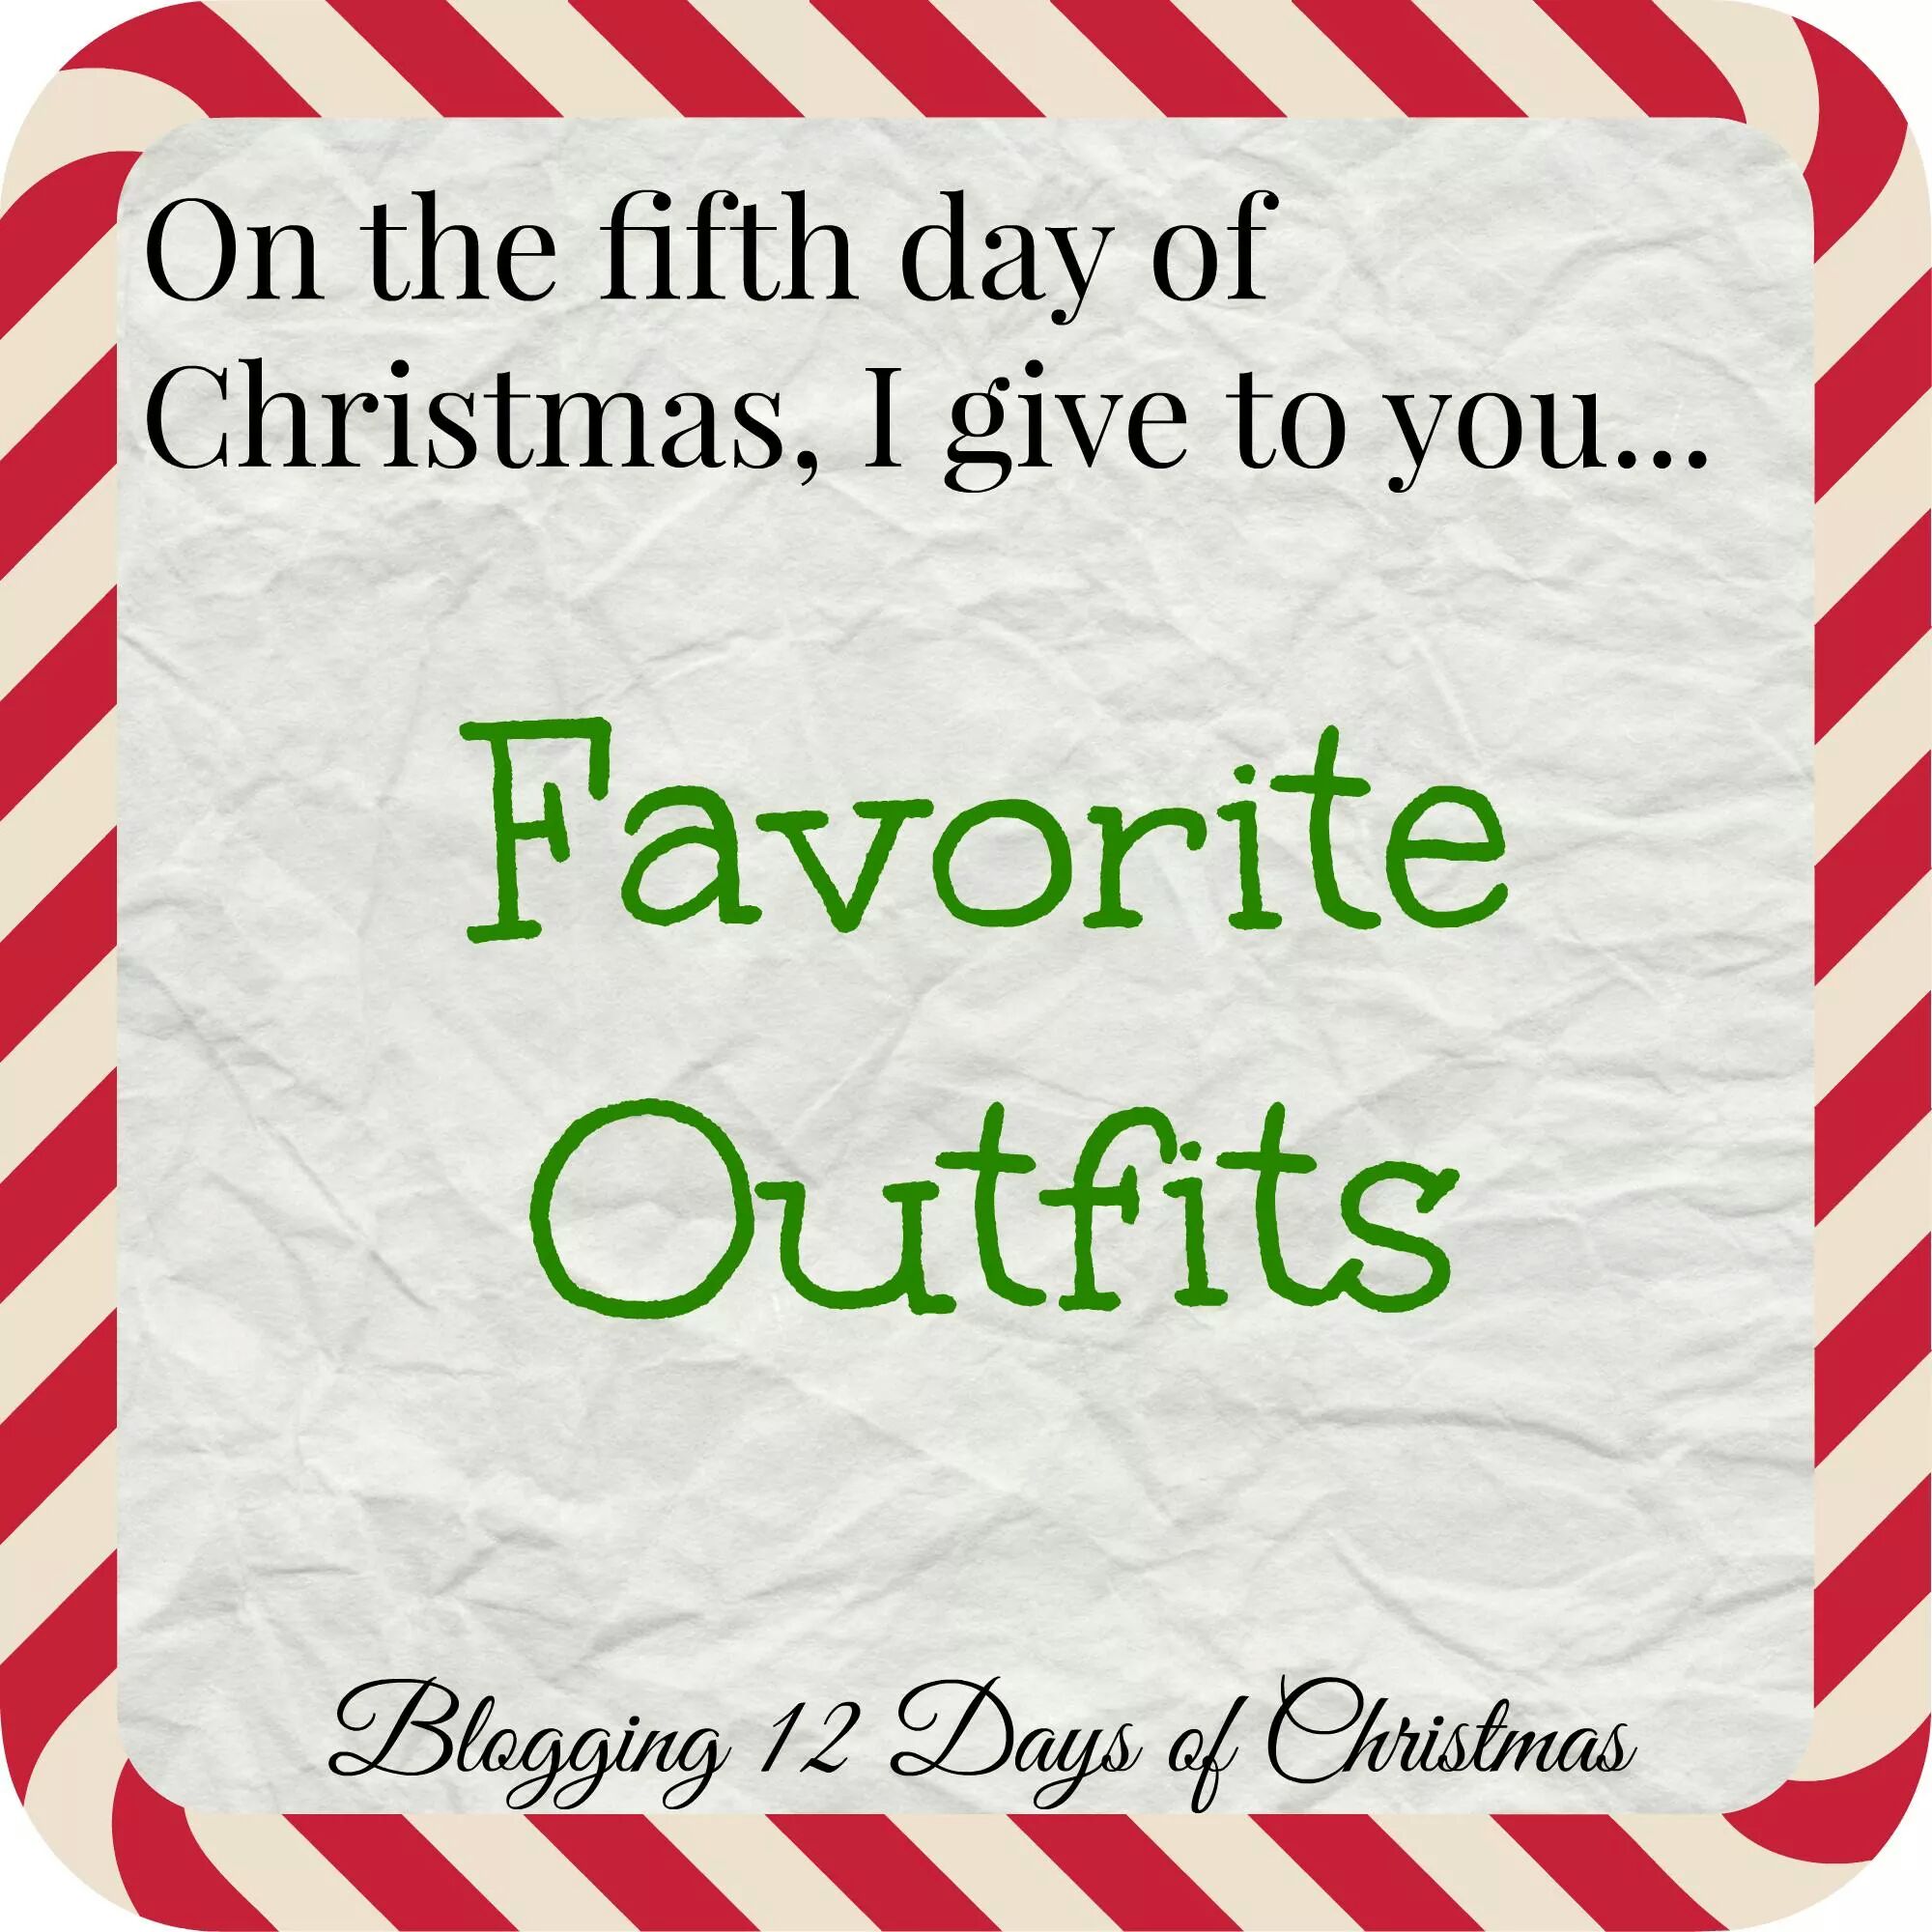 Day 5 of Blogging Christmas